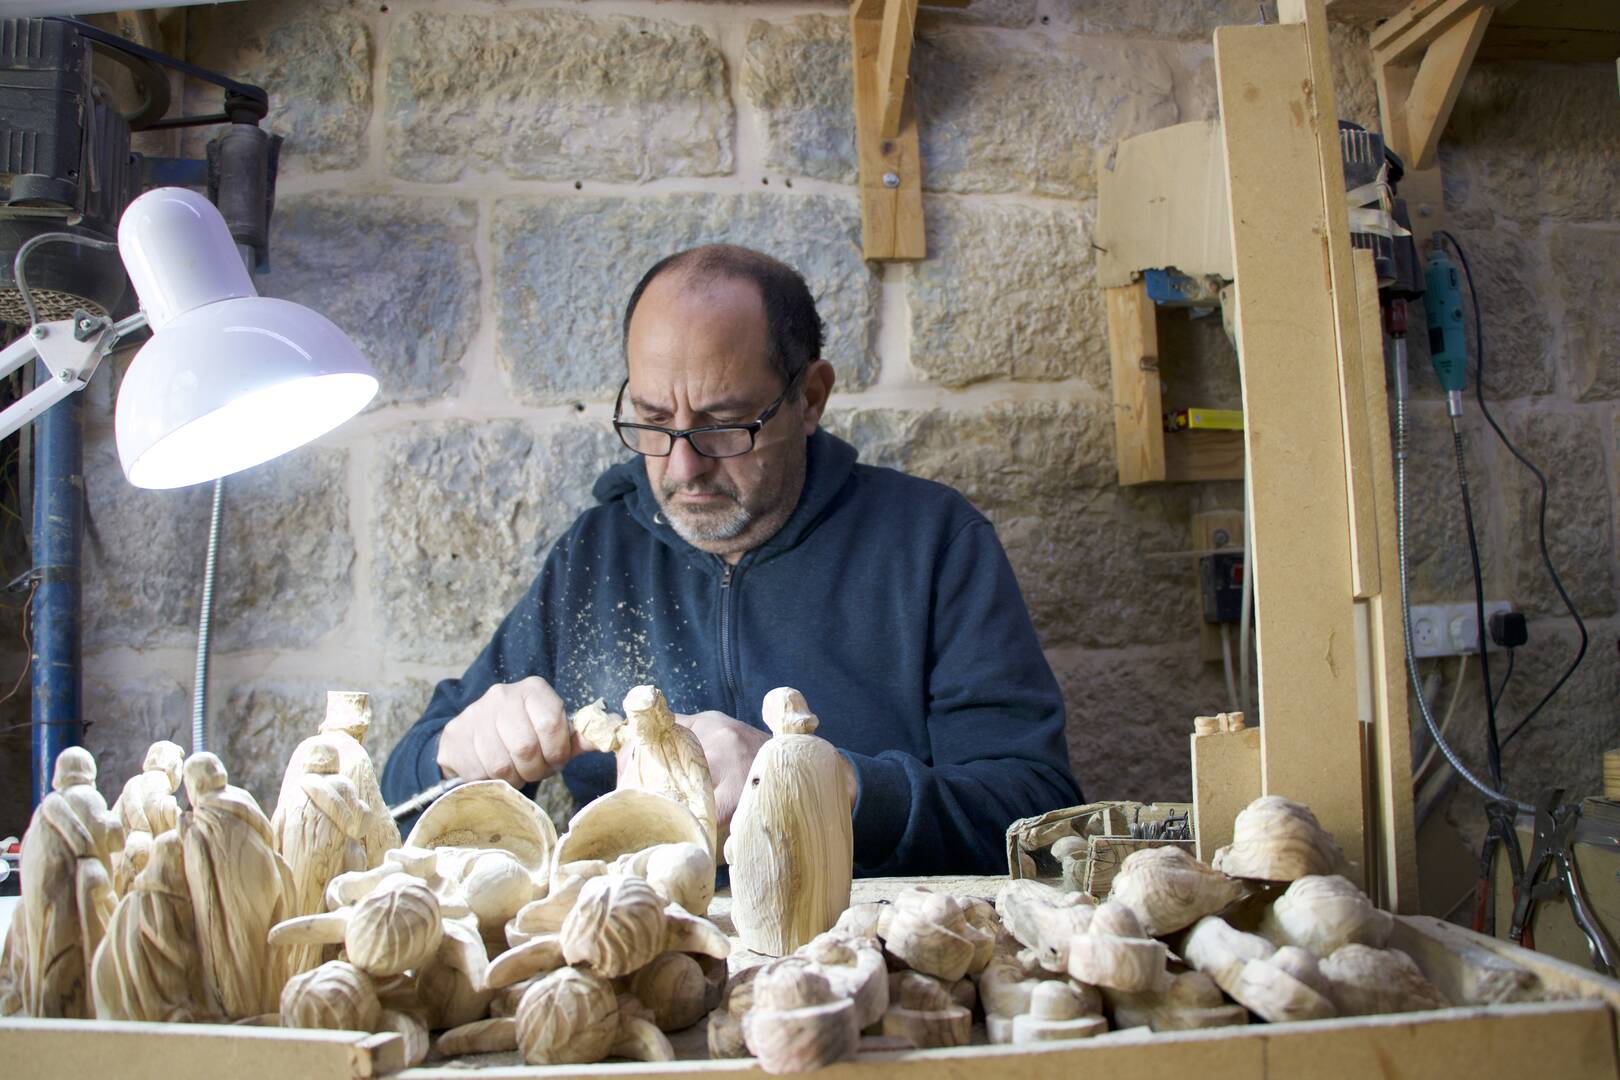 Jack Giacoman carves wood at his workshop on Milk Grotto Street (Photo by author)